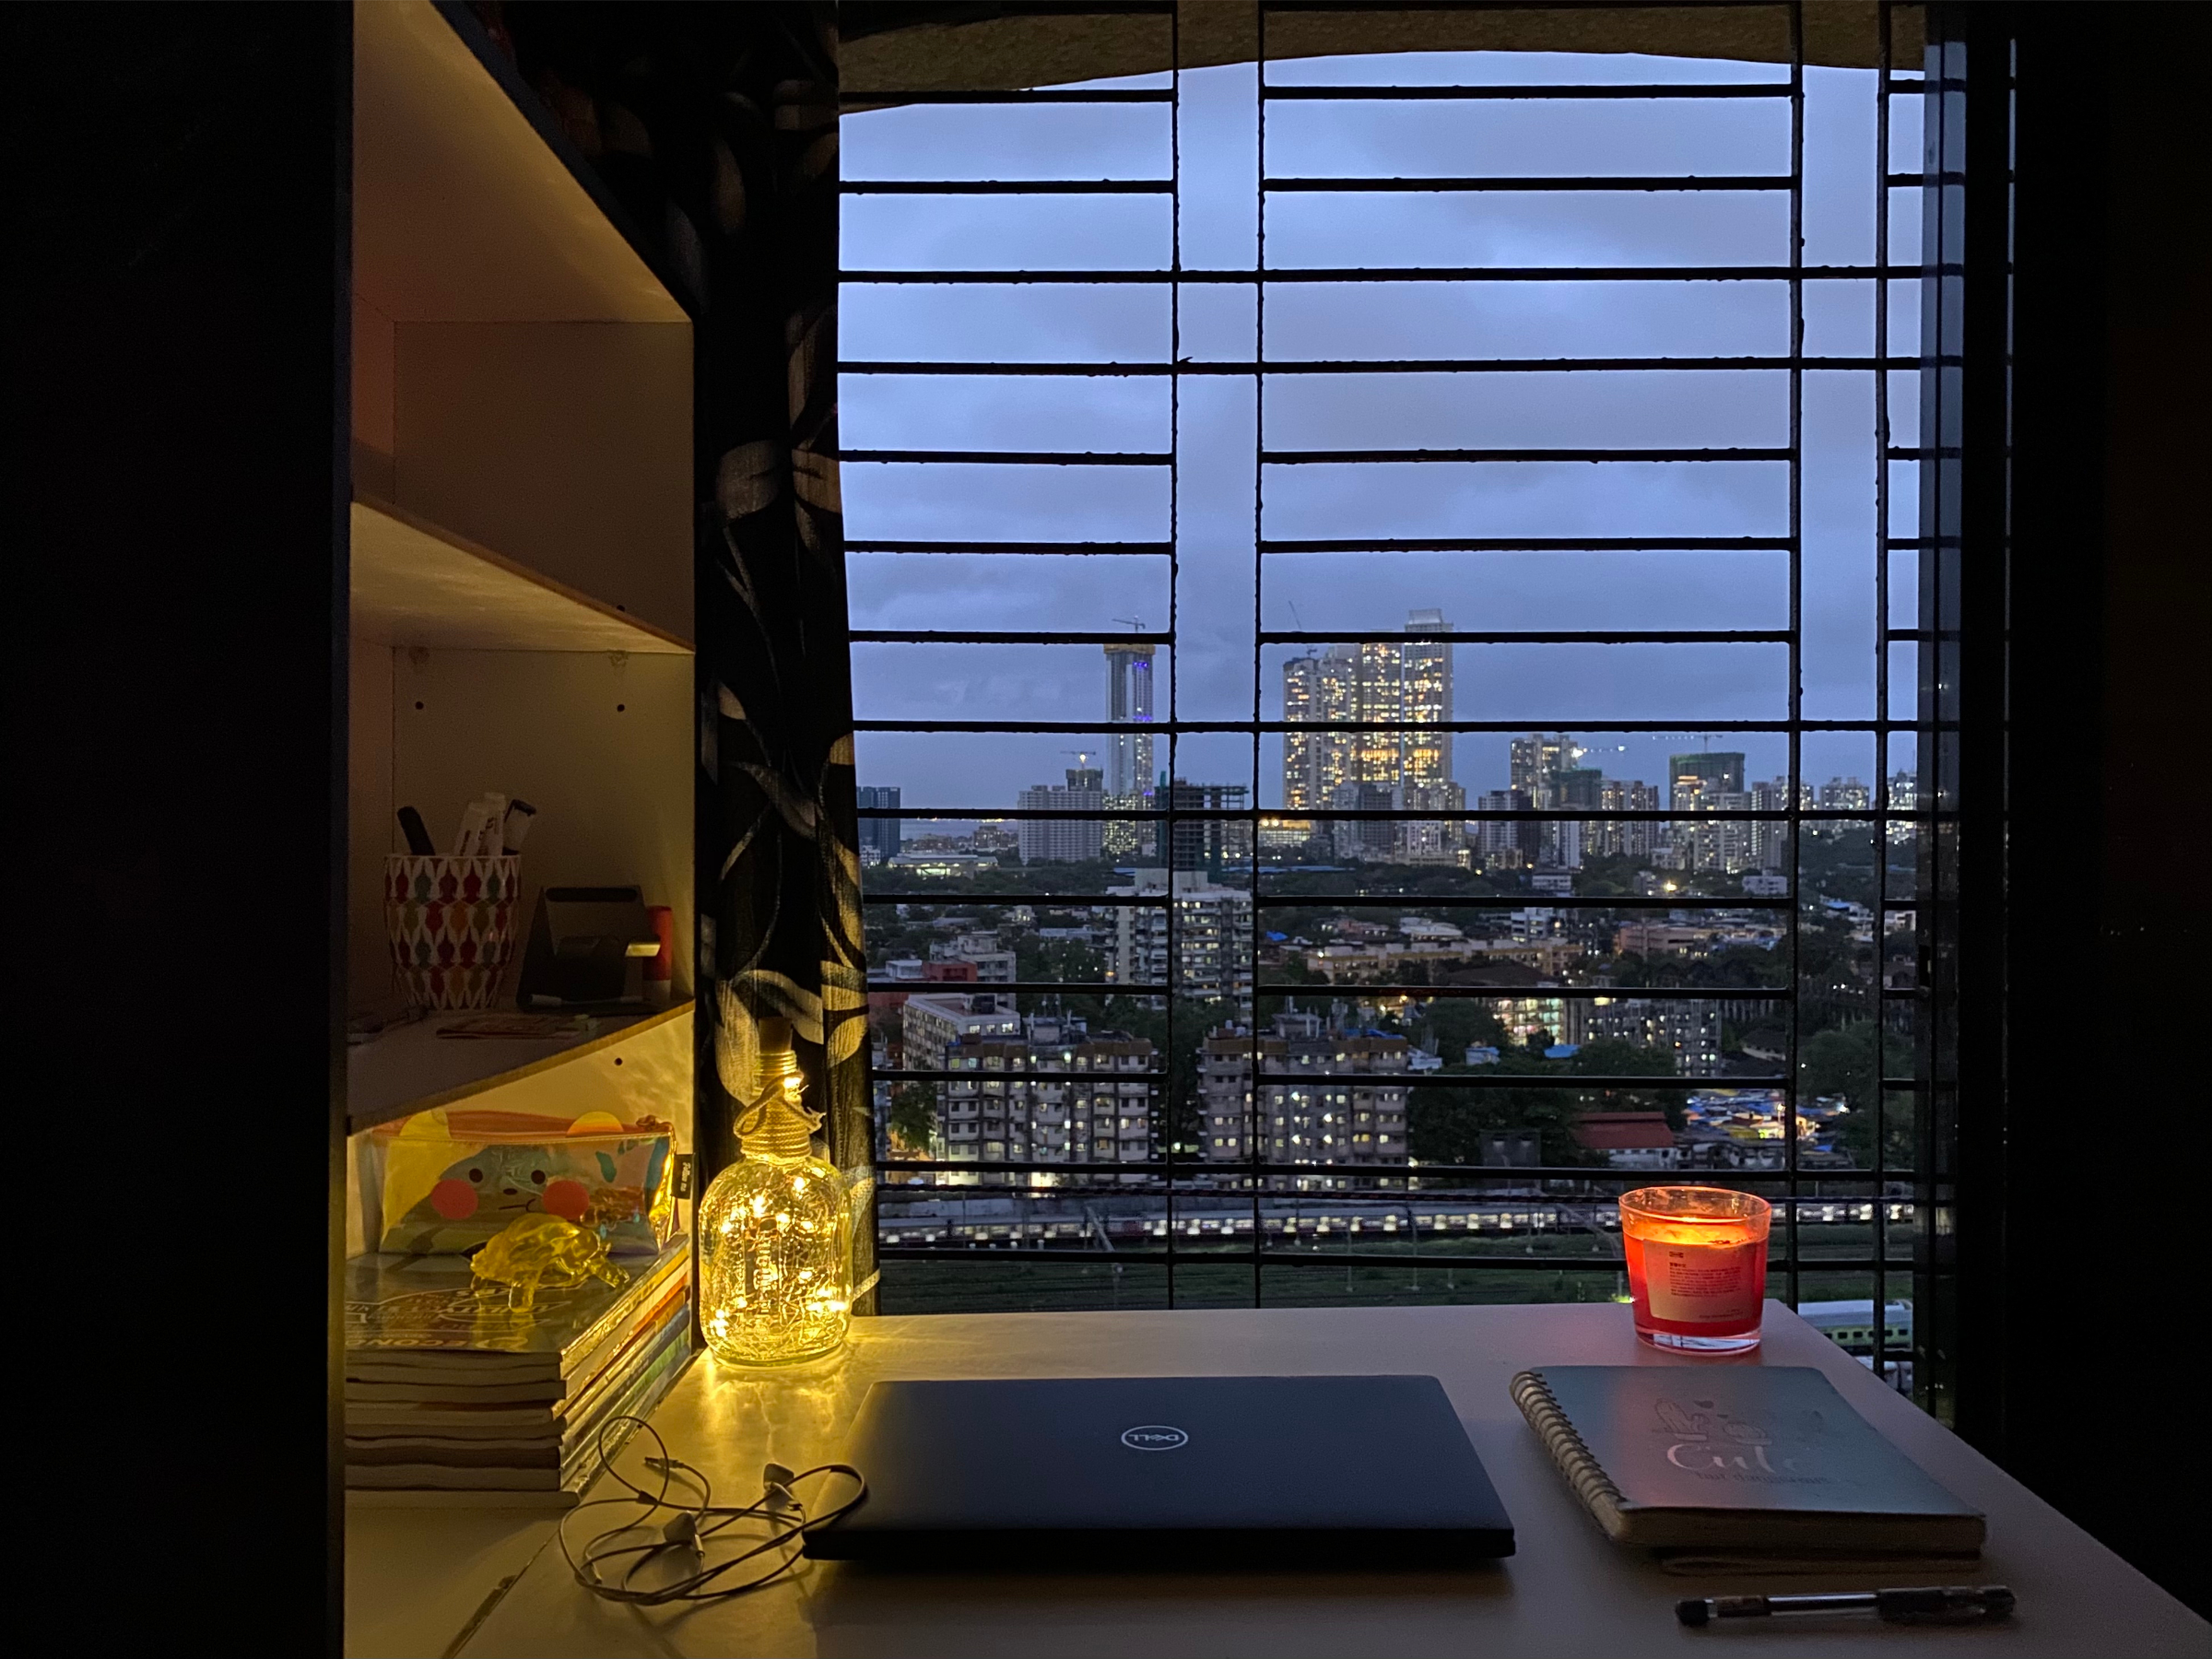 Sharanya's remote co-op workspace at home in Mumbai, India for California based co-op job